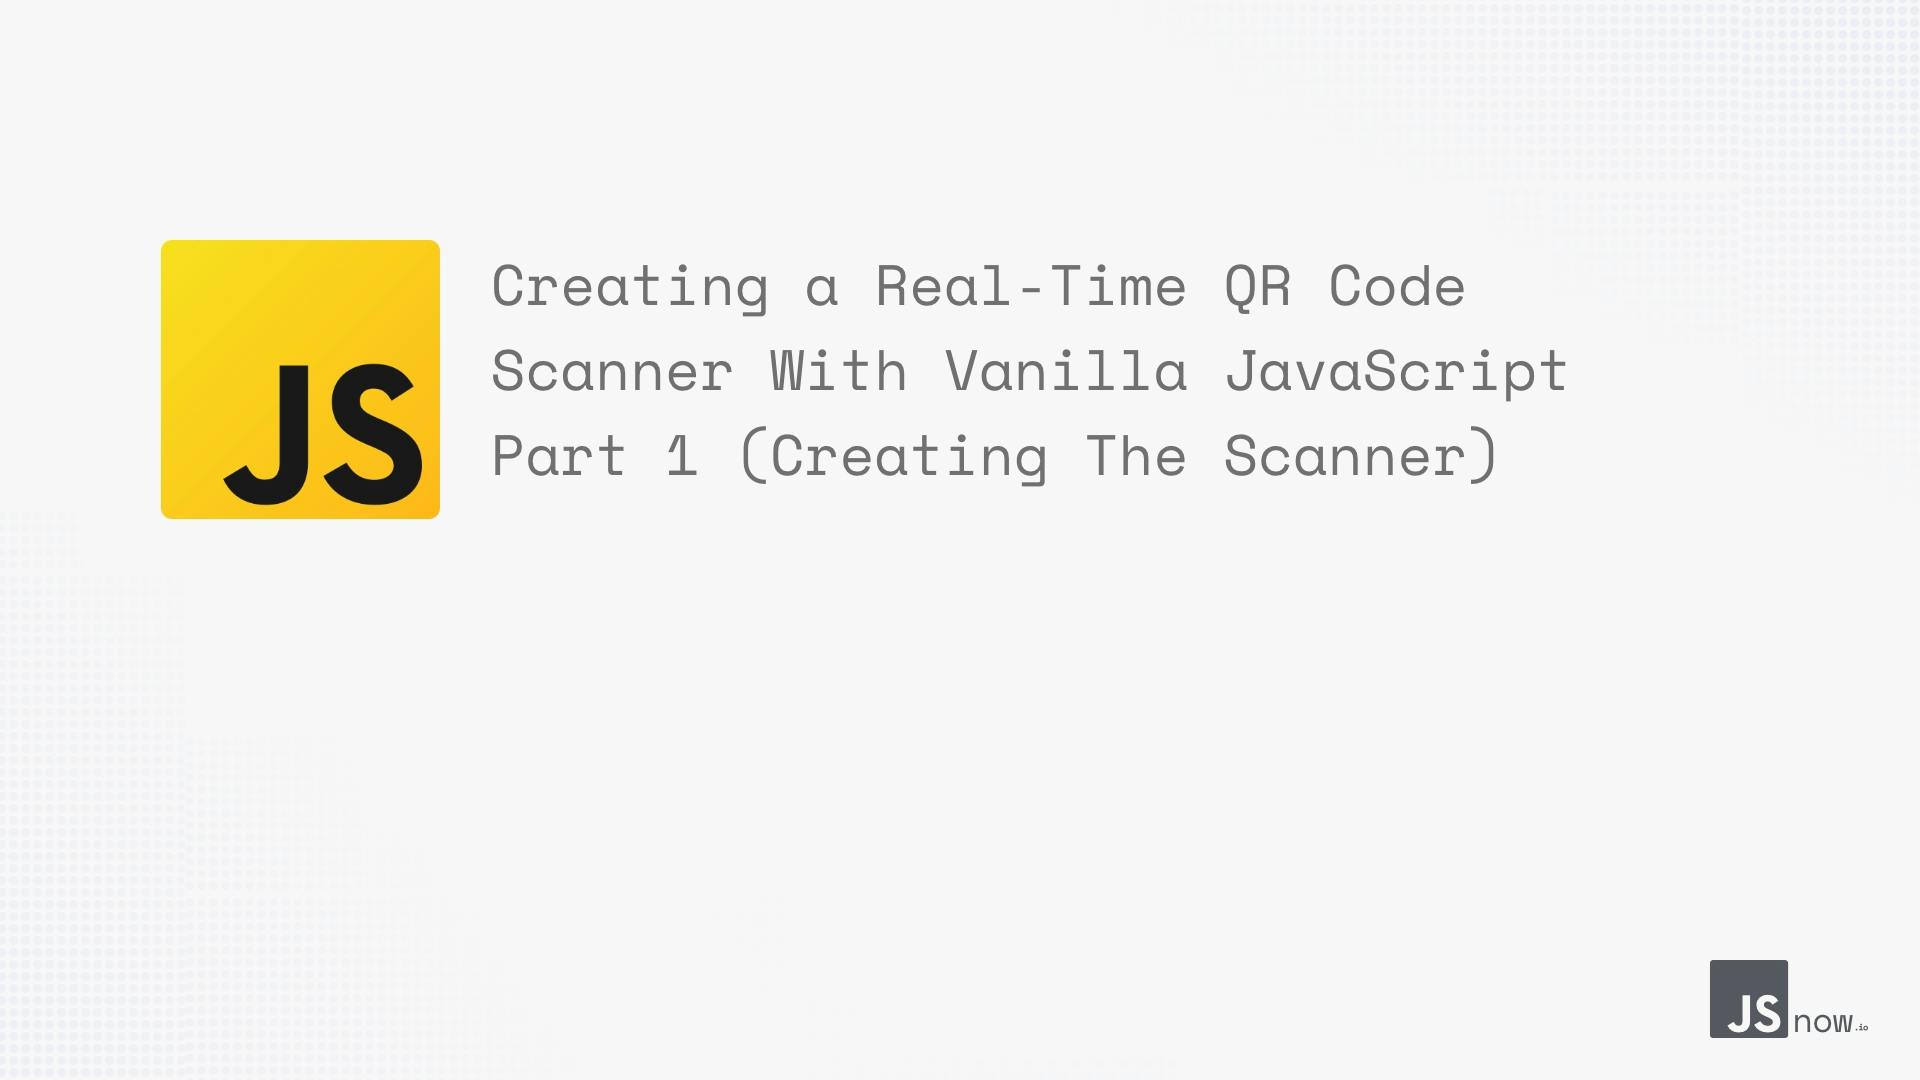 Creating a Real-Time QR Code Scanner With Vanilla JavaScript Part 1 thumbnail